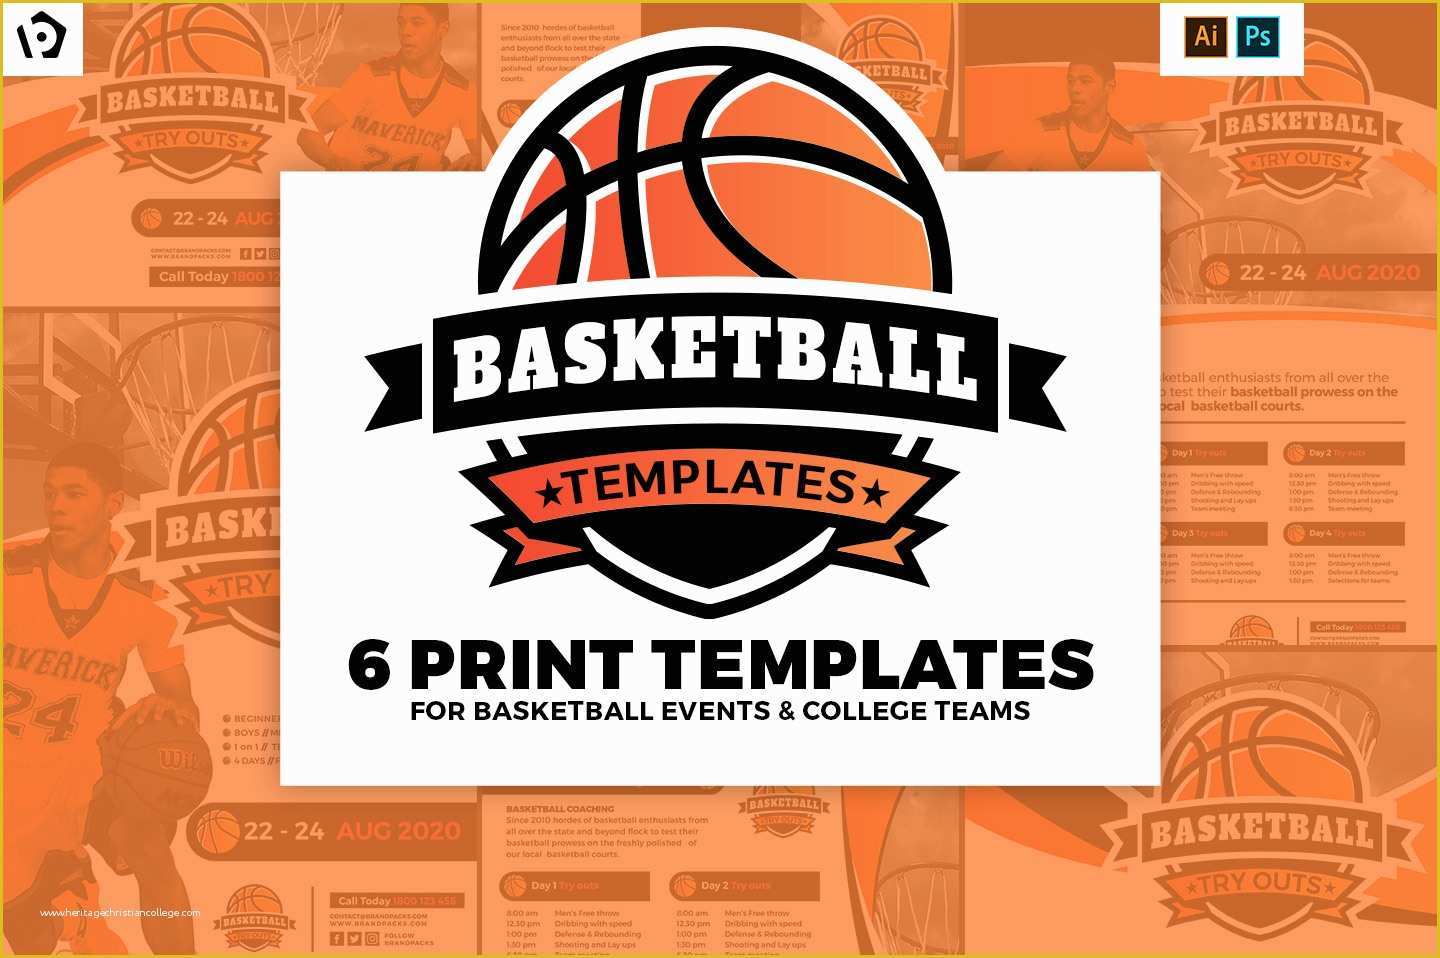 Free Basketball Photoshop Templates Of Basketball Templates Pack for Shop & Illustrator